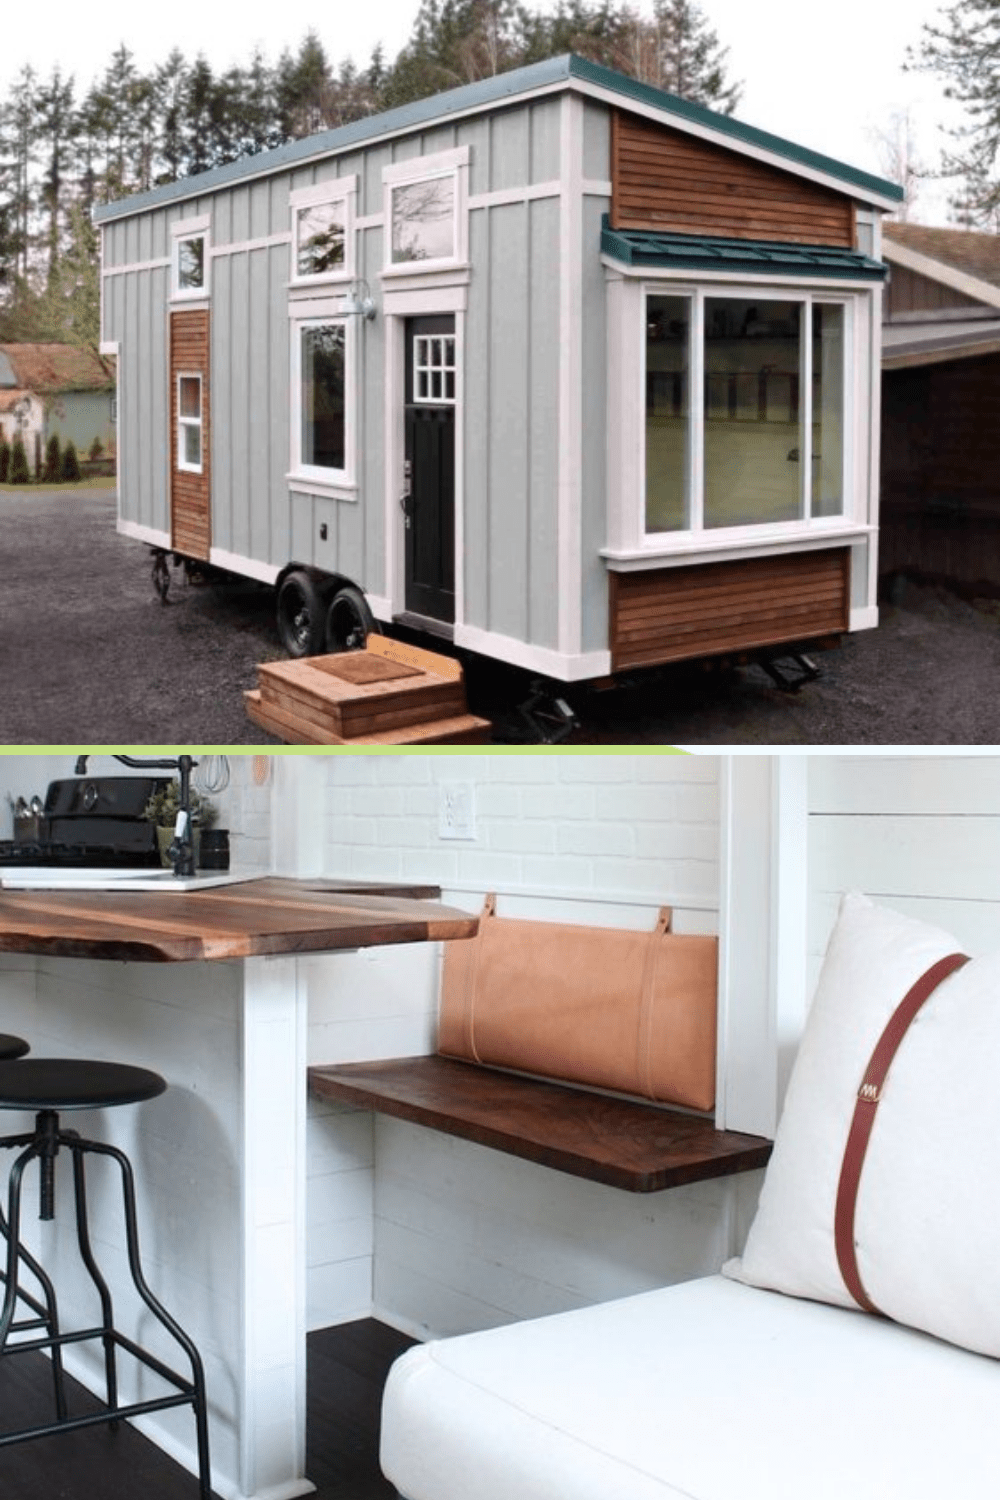 Tiny Home Ideas getaway by Hand Crafted movement